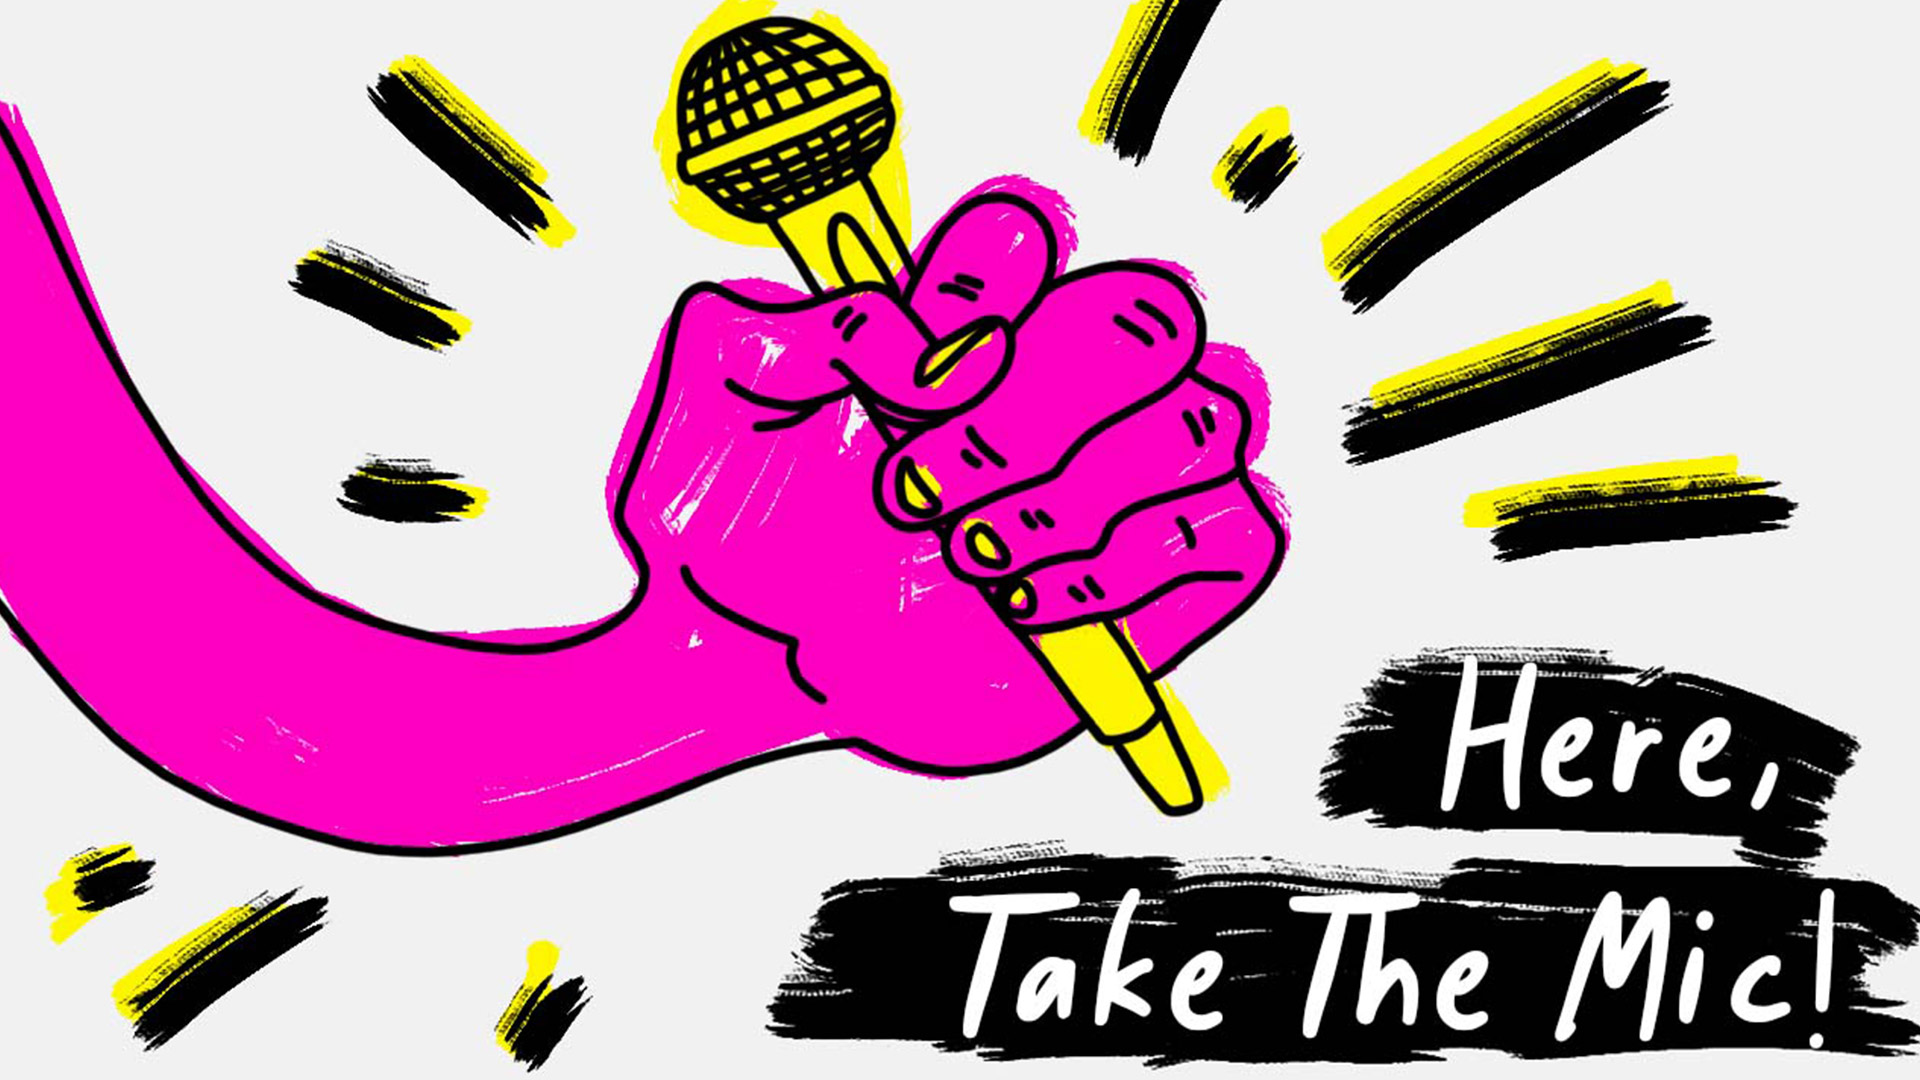 An illustration of a pink hand holding a microphone.